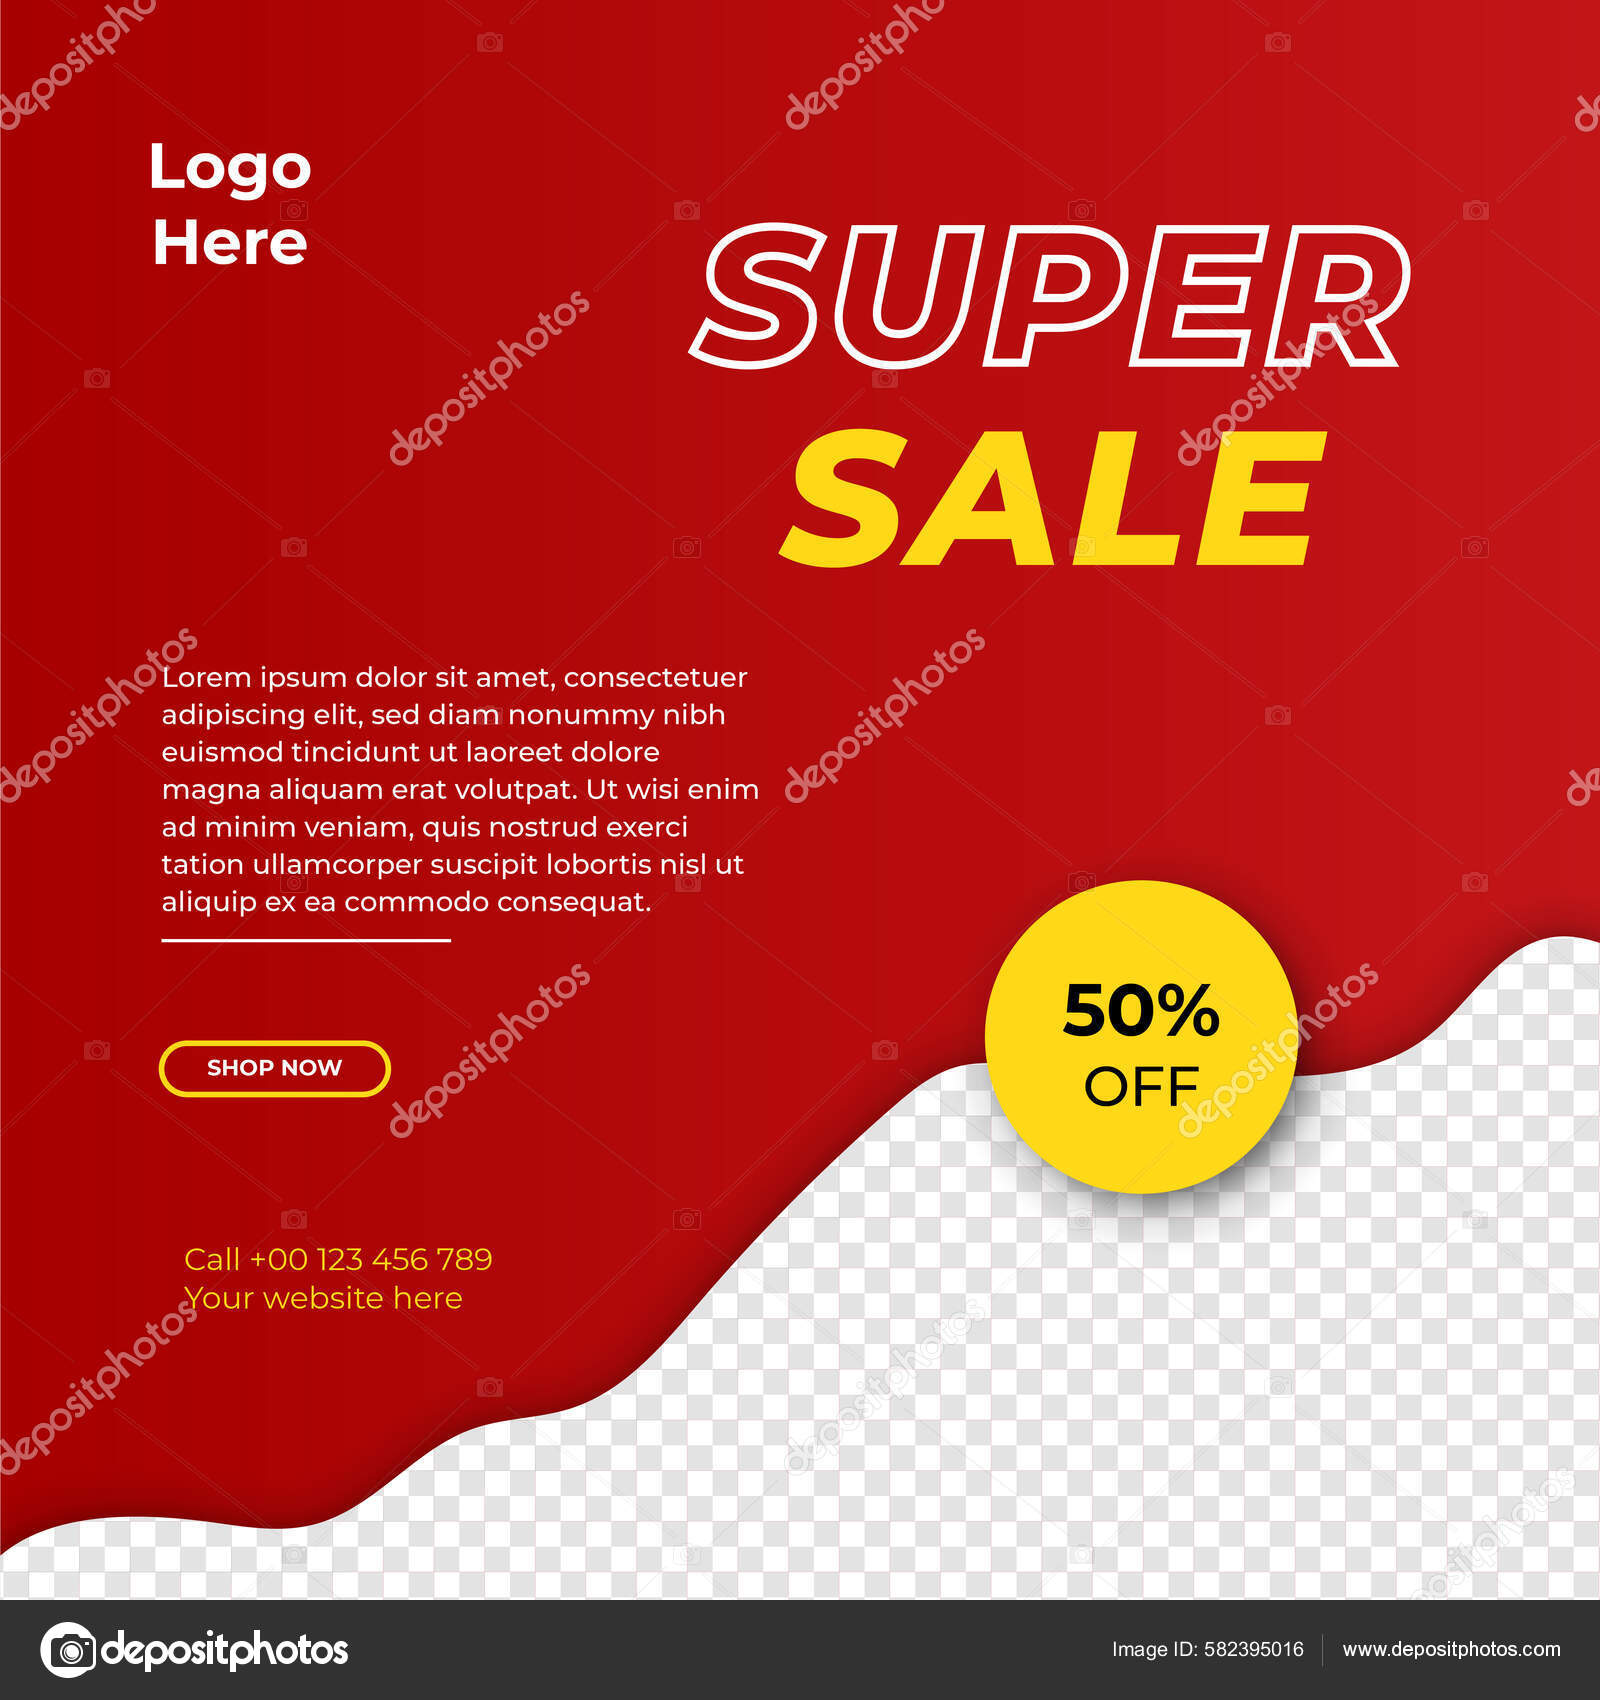 Discount Offer on Clothes for All Sizes Online Flyer Template